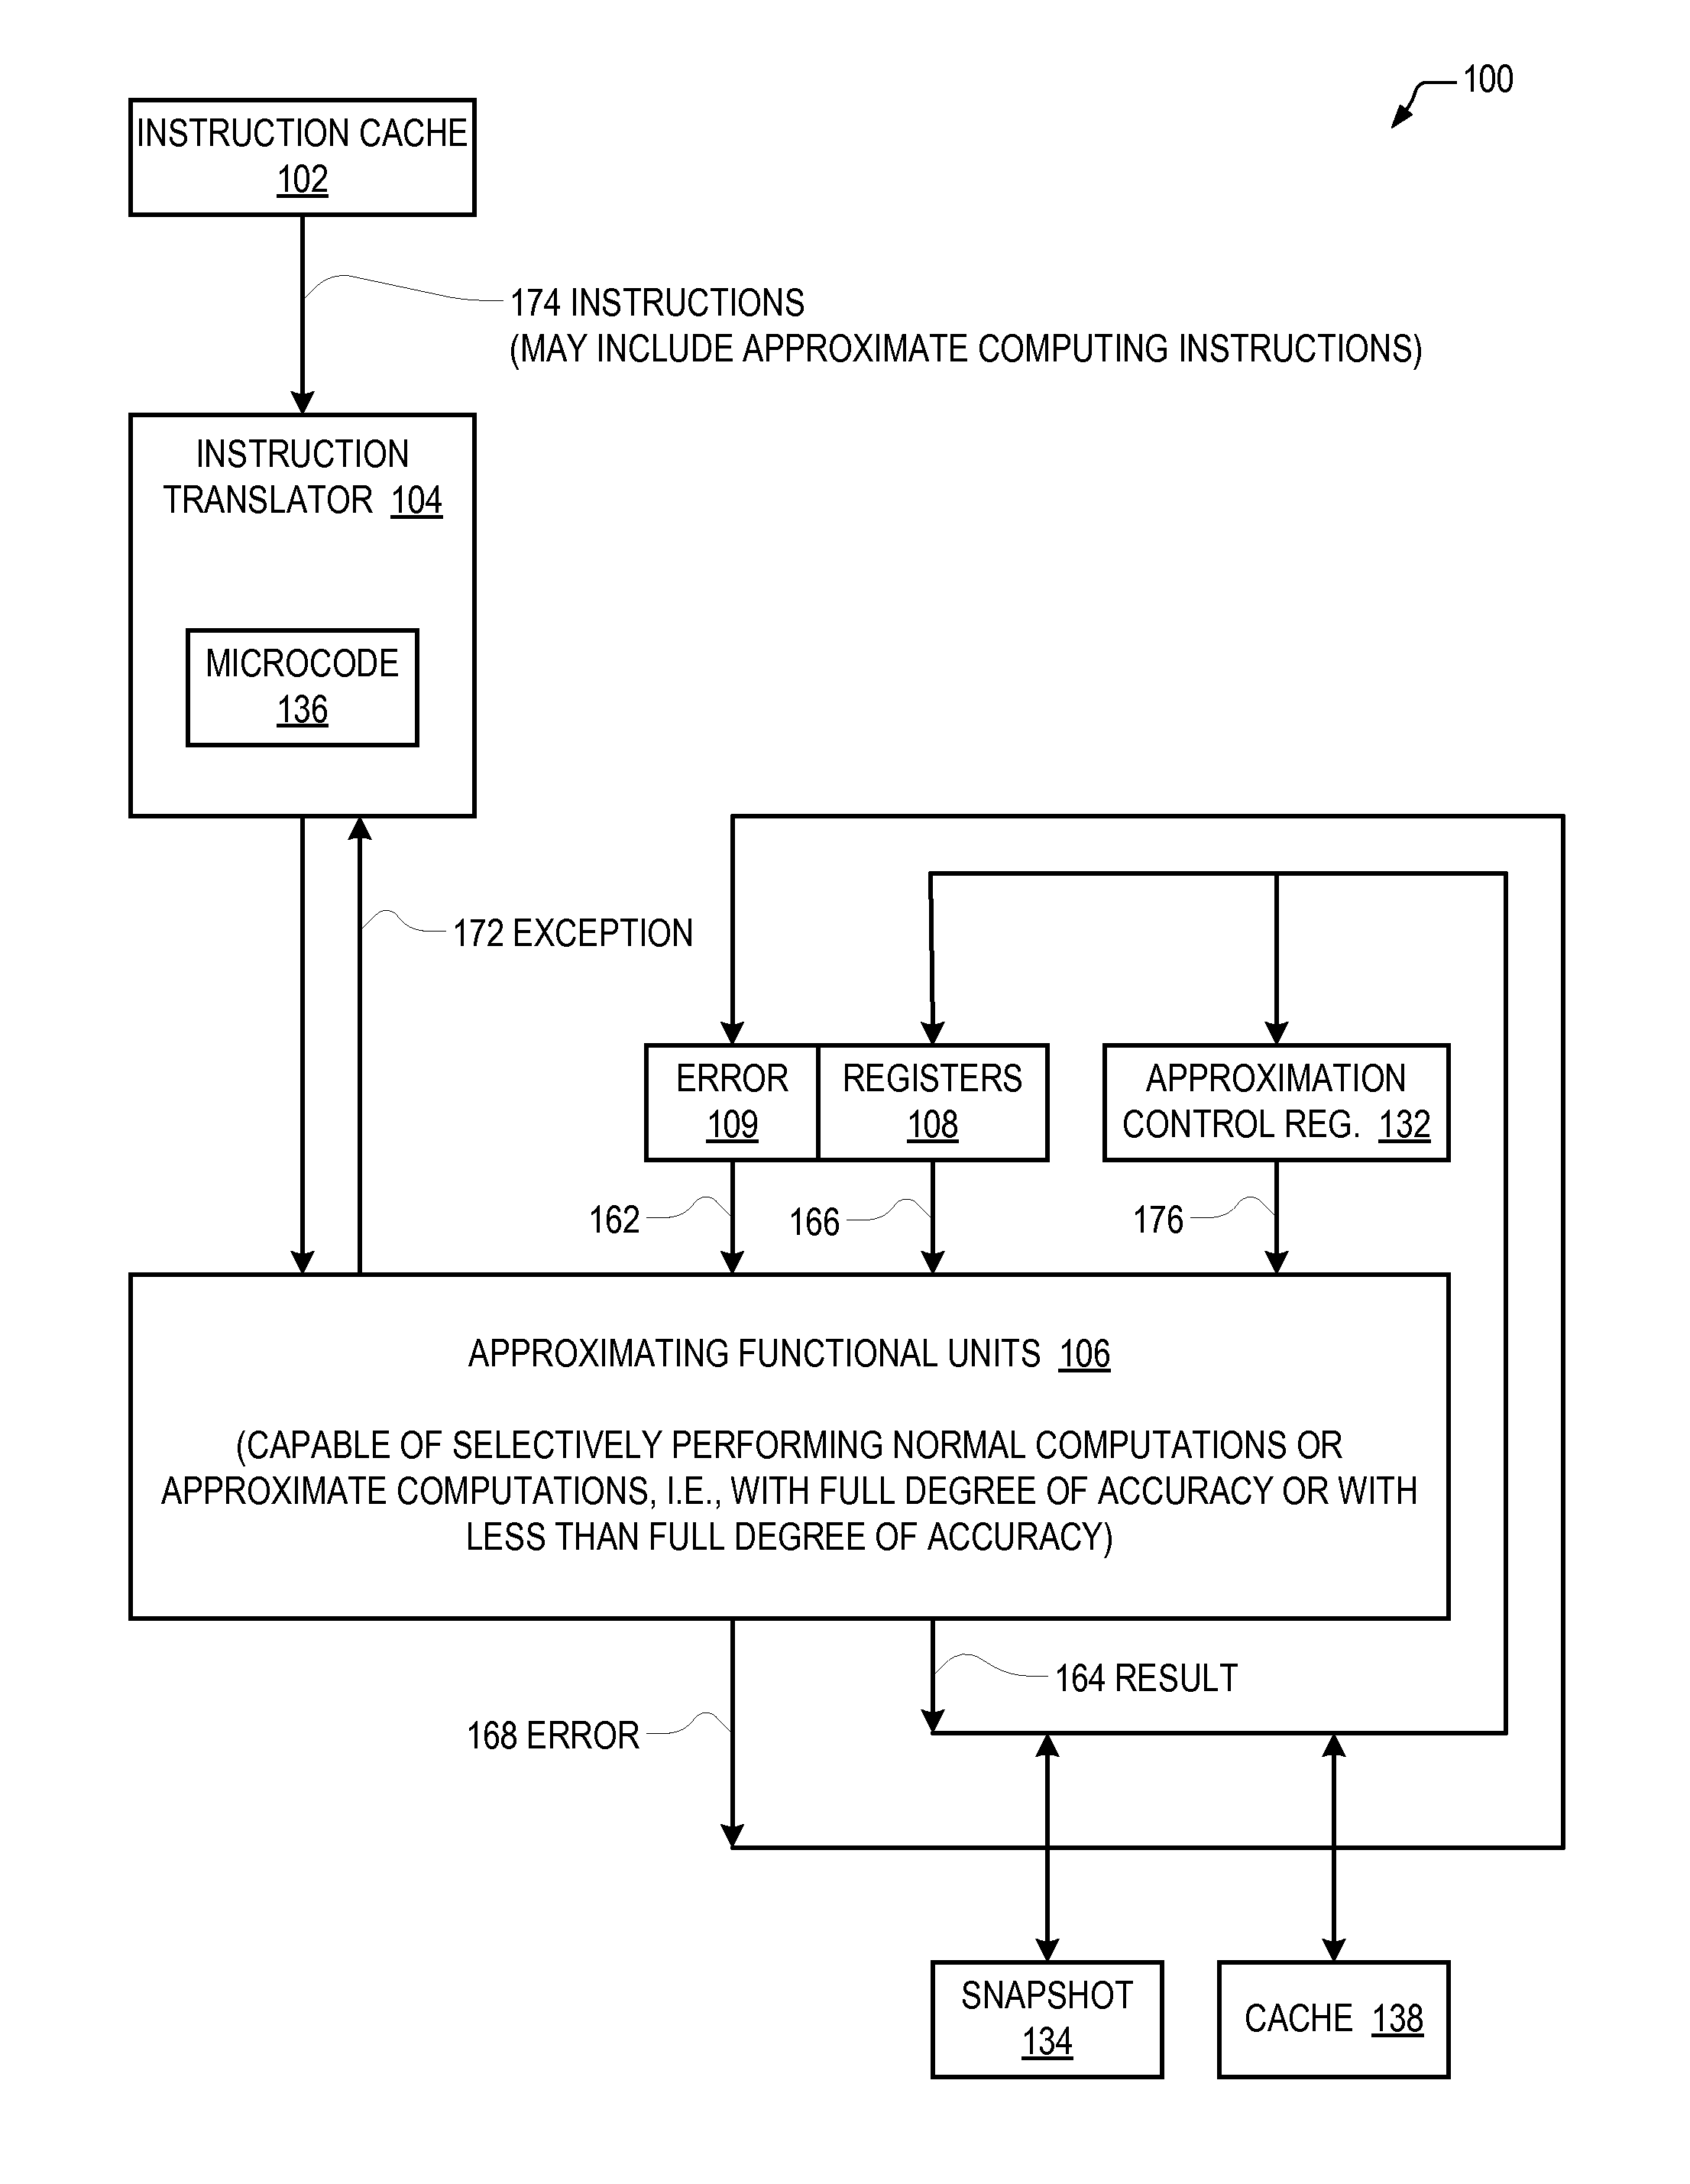 Processor that performs approximate computing instructions